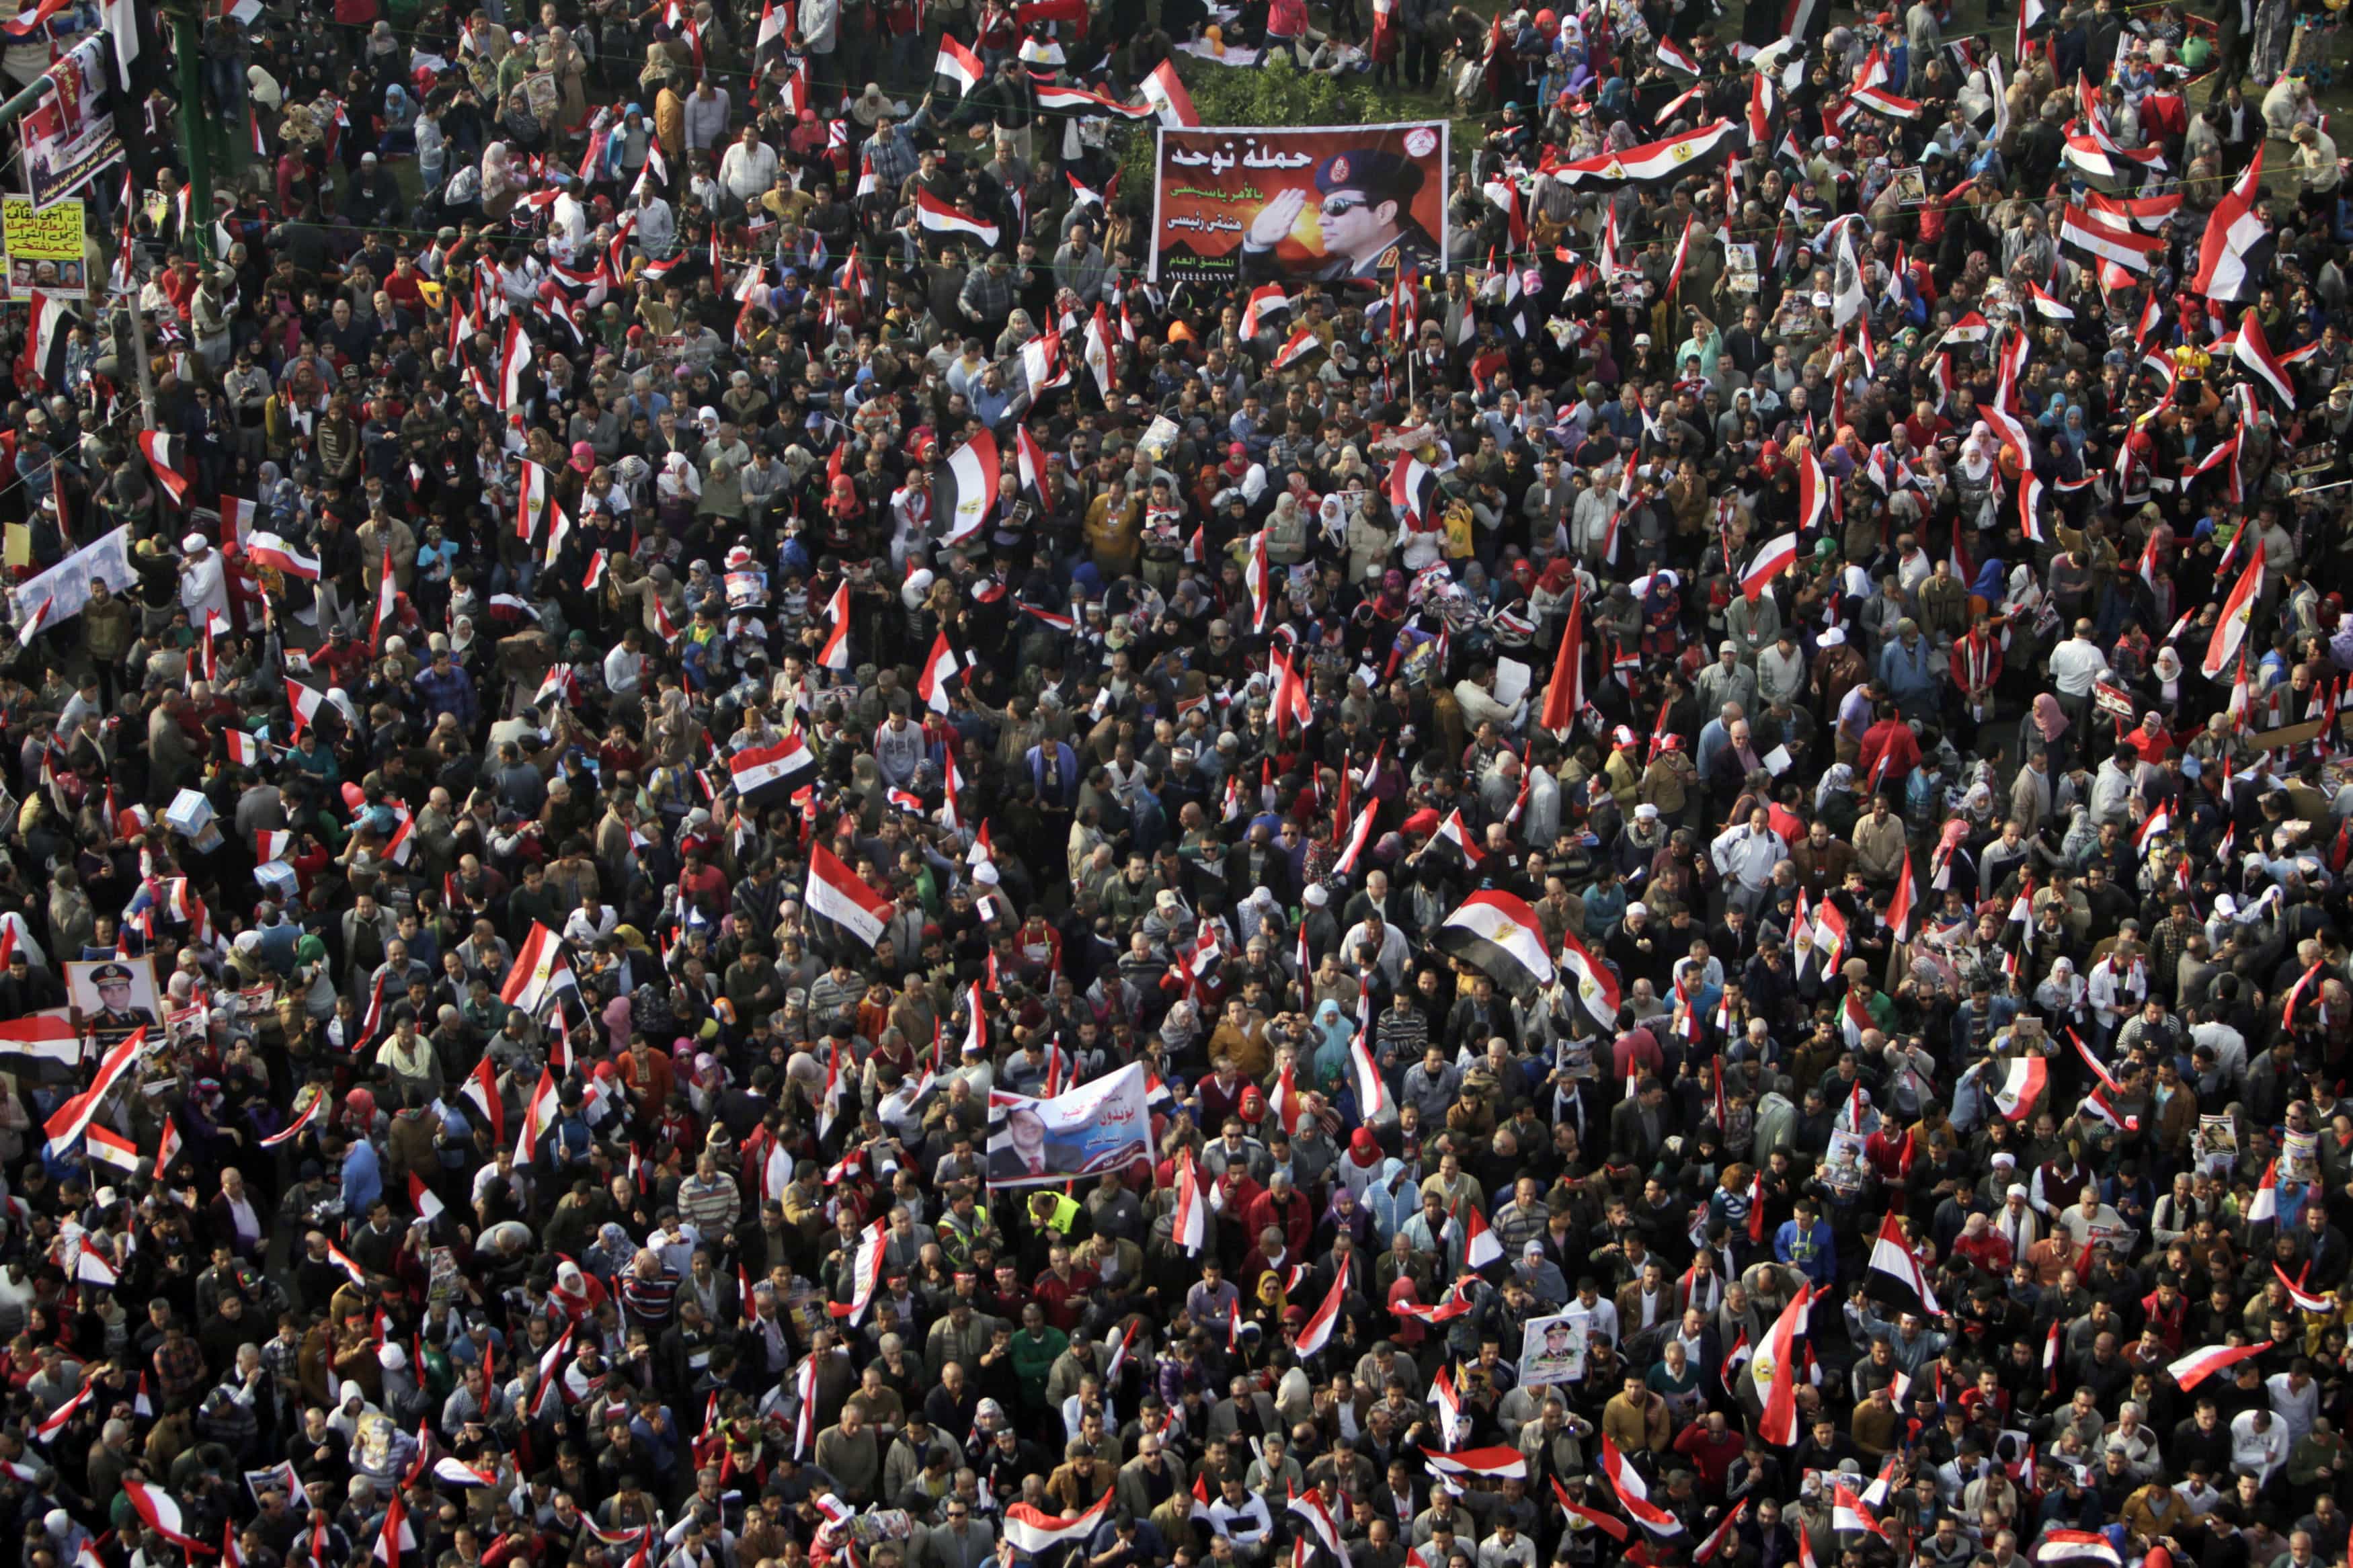 Demonstration at Tahrir Square in Cairo, REUTERS/Mohamed Abd El Ghany